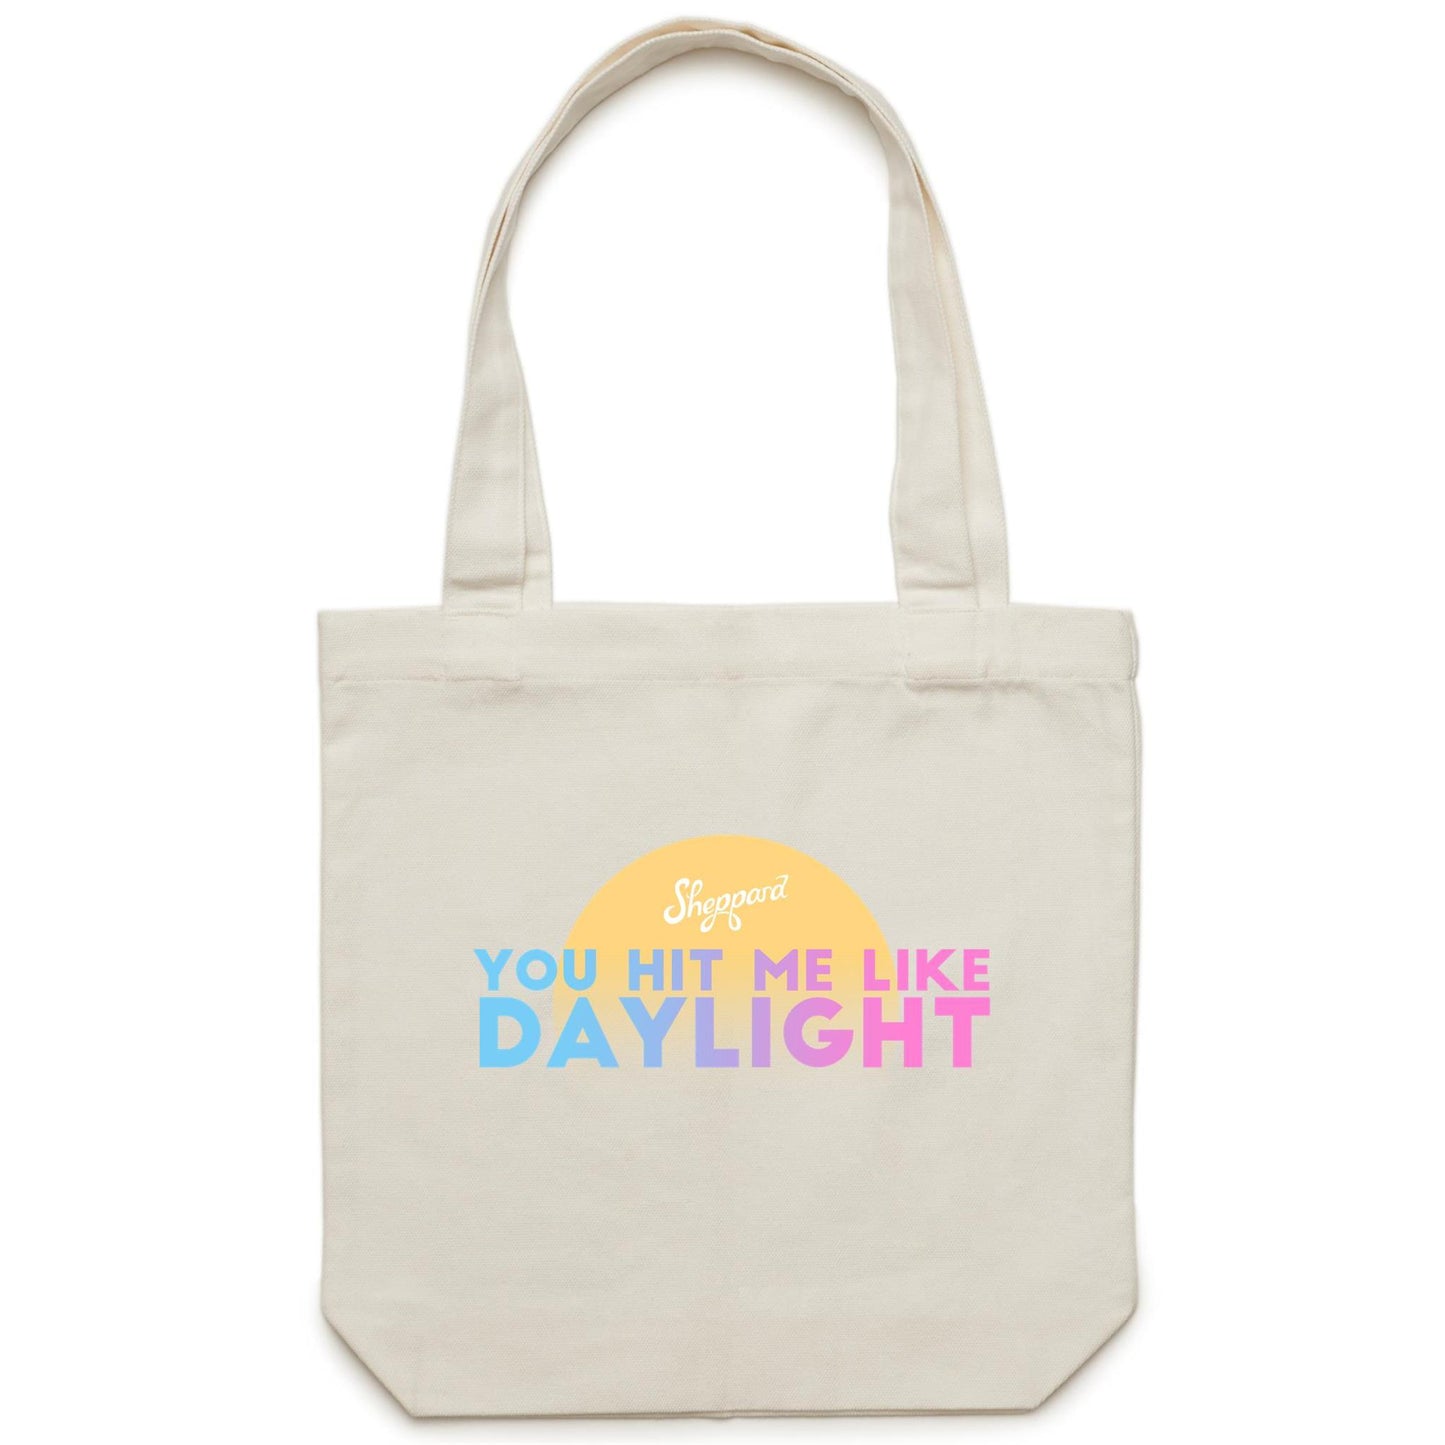 NEW! Daylight - Canvas Tote Bag